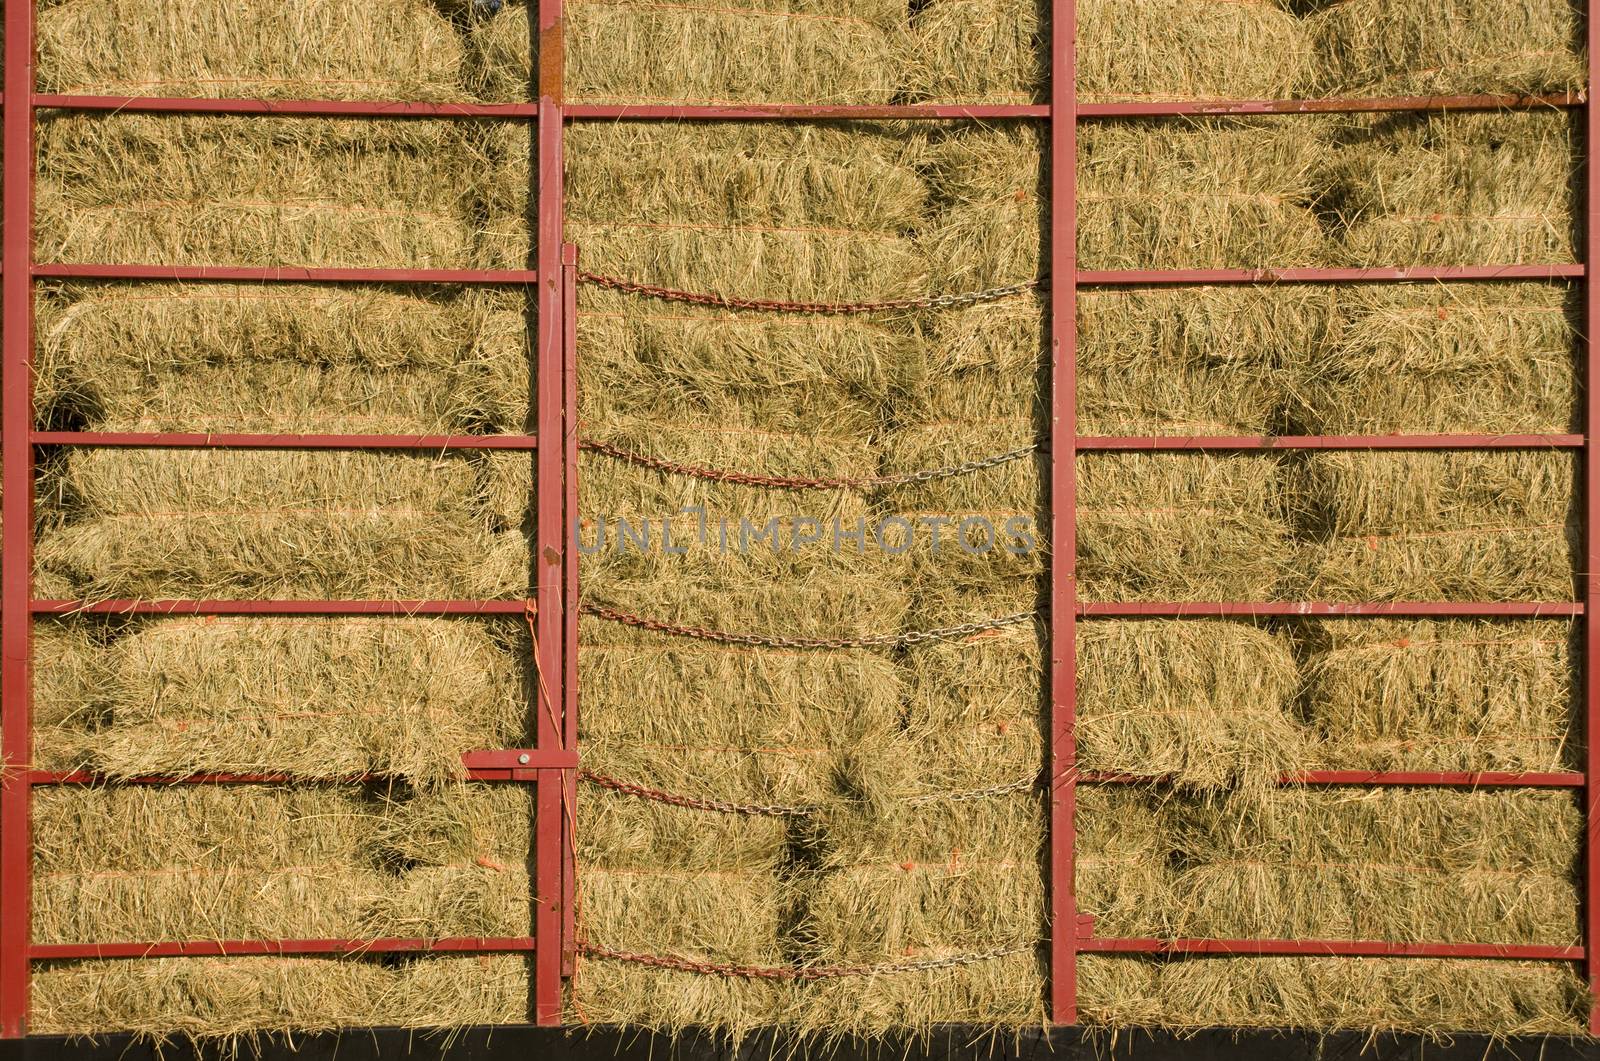 Hay bales piled within a cart with red metal bars